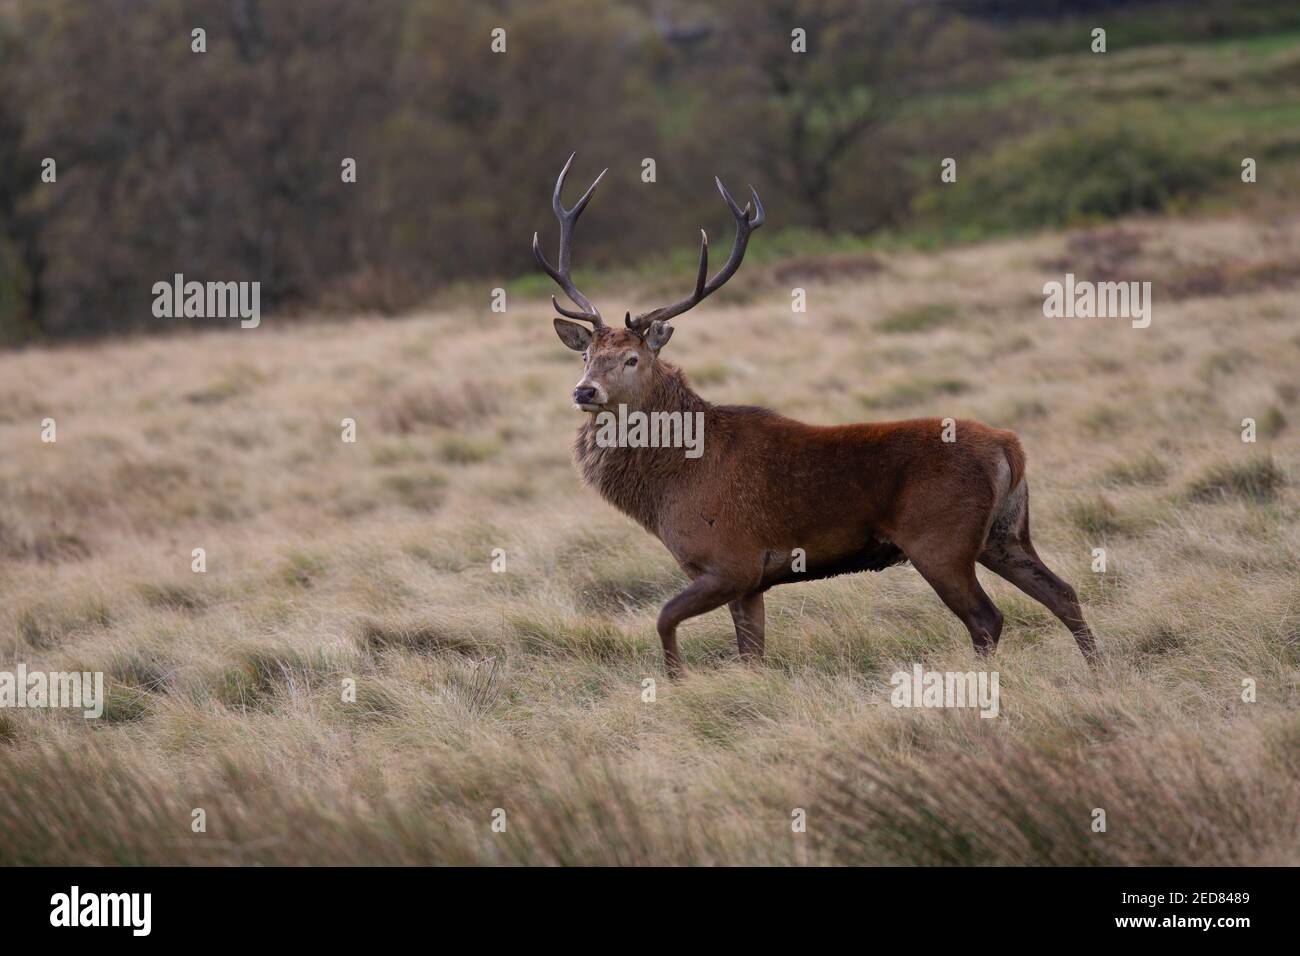 Wild red stag deer standing alone in the British countryside. Taken in the Peak District National Park in England, UK. Stock Photo